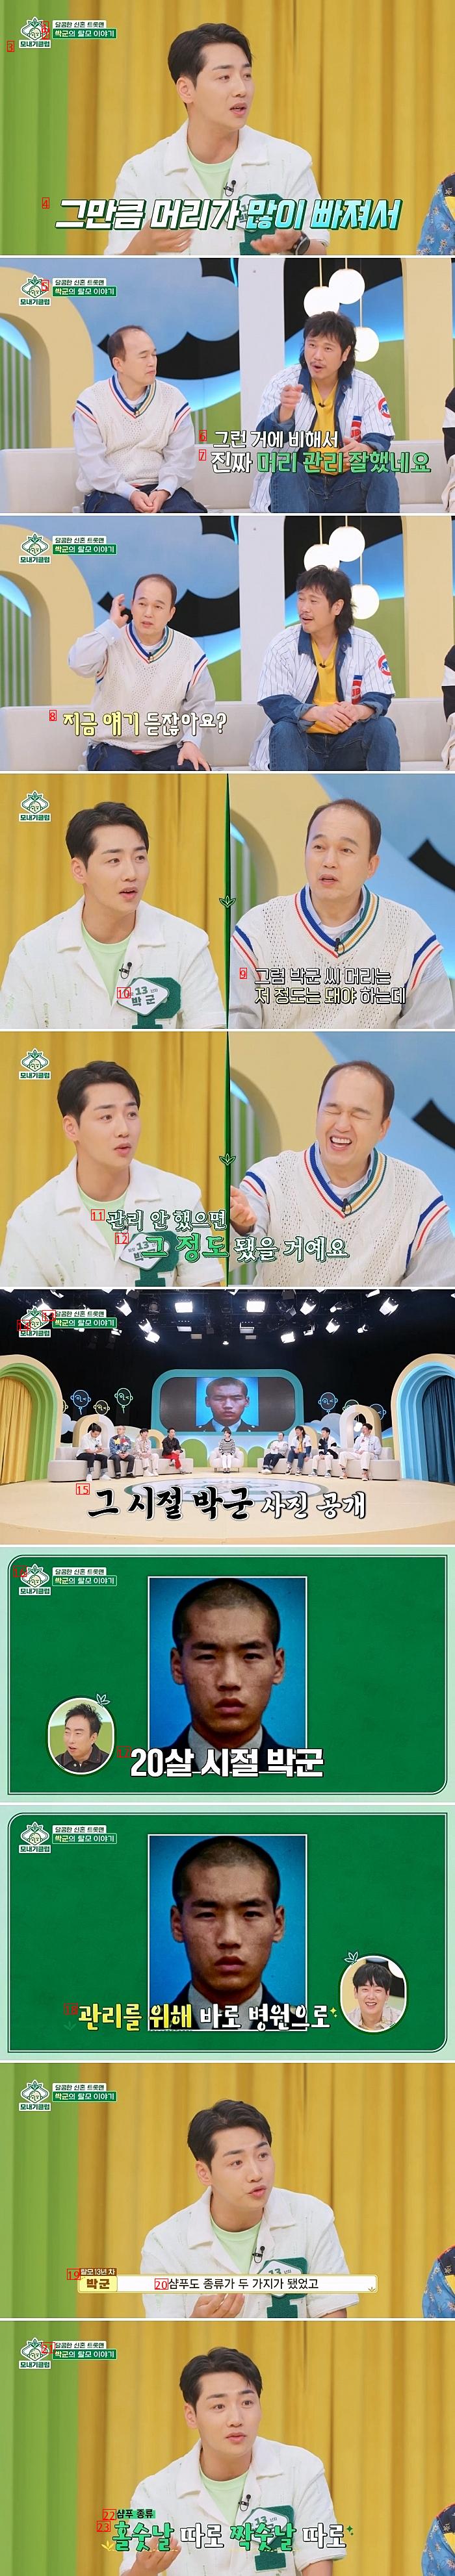 Park in his 20s said he would have become Kim Kwang Kyu if he didn't take care of it